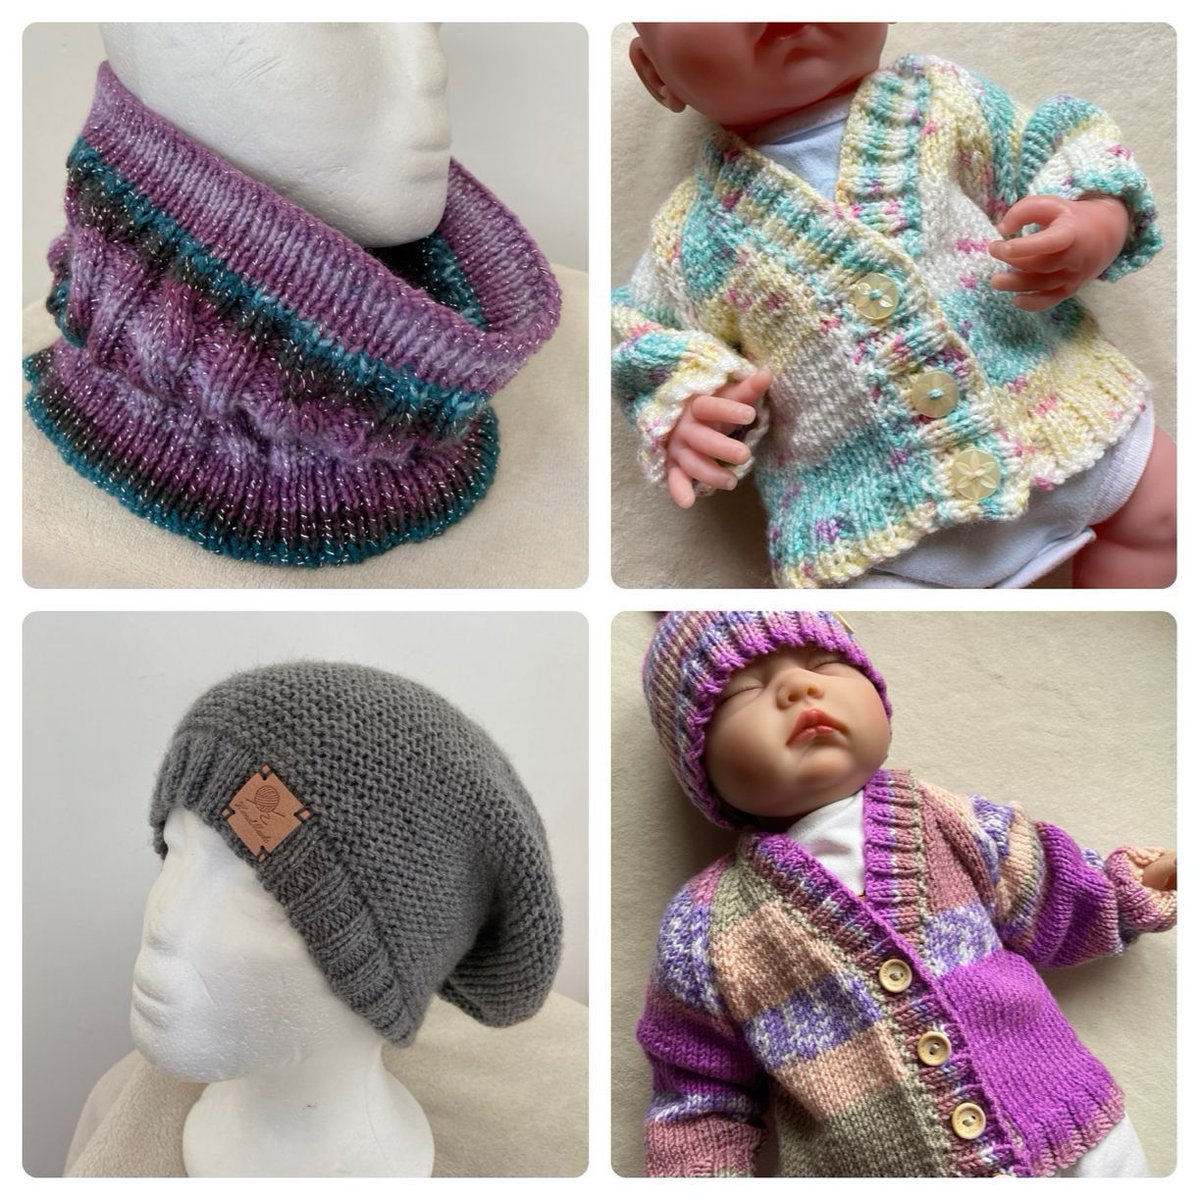 Hand knit gifts for babies and adults available in my Etsy shop 🌈🧶👶🏻👩‍🦰🧔🏻

Bettysmumknits.etsy.com

#MHHSBD #smallbizzsunday #ShopIndie #knitwear